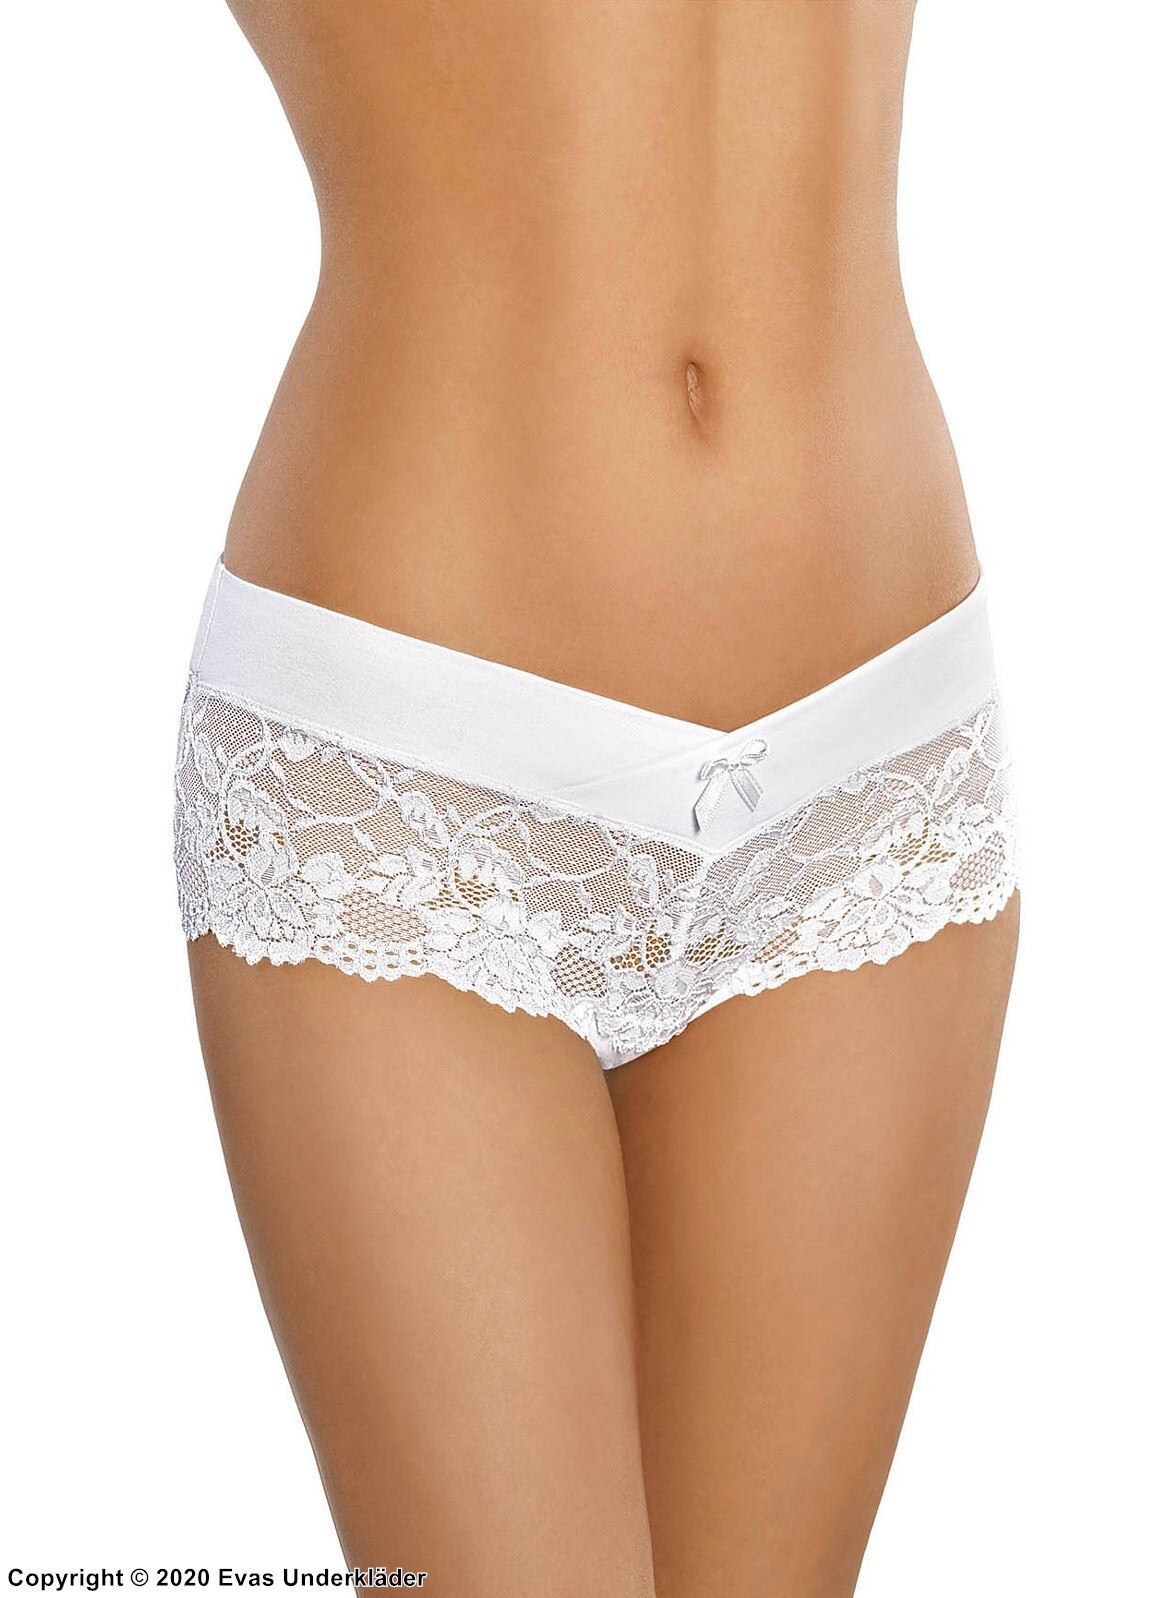 Romantic cheeky panties, floral lace